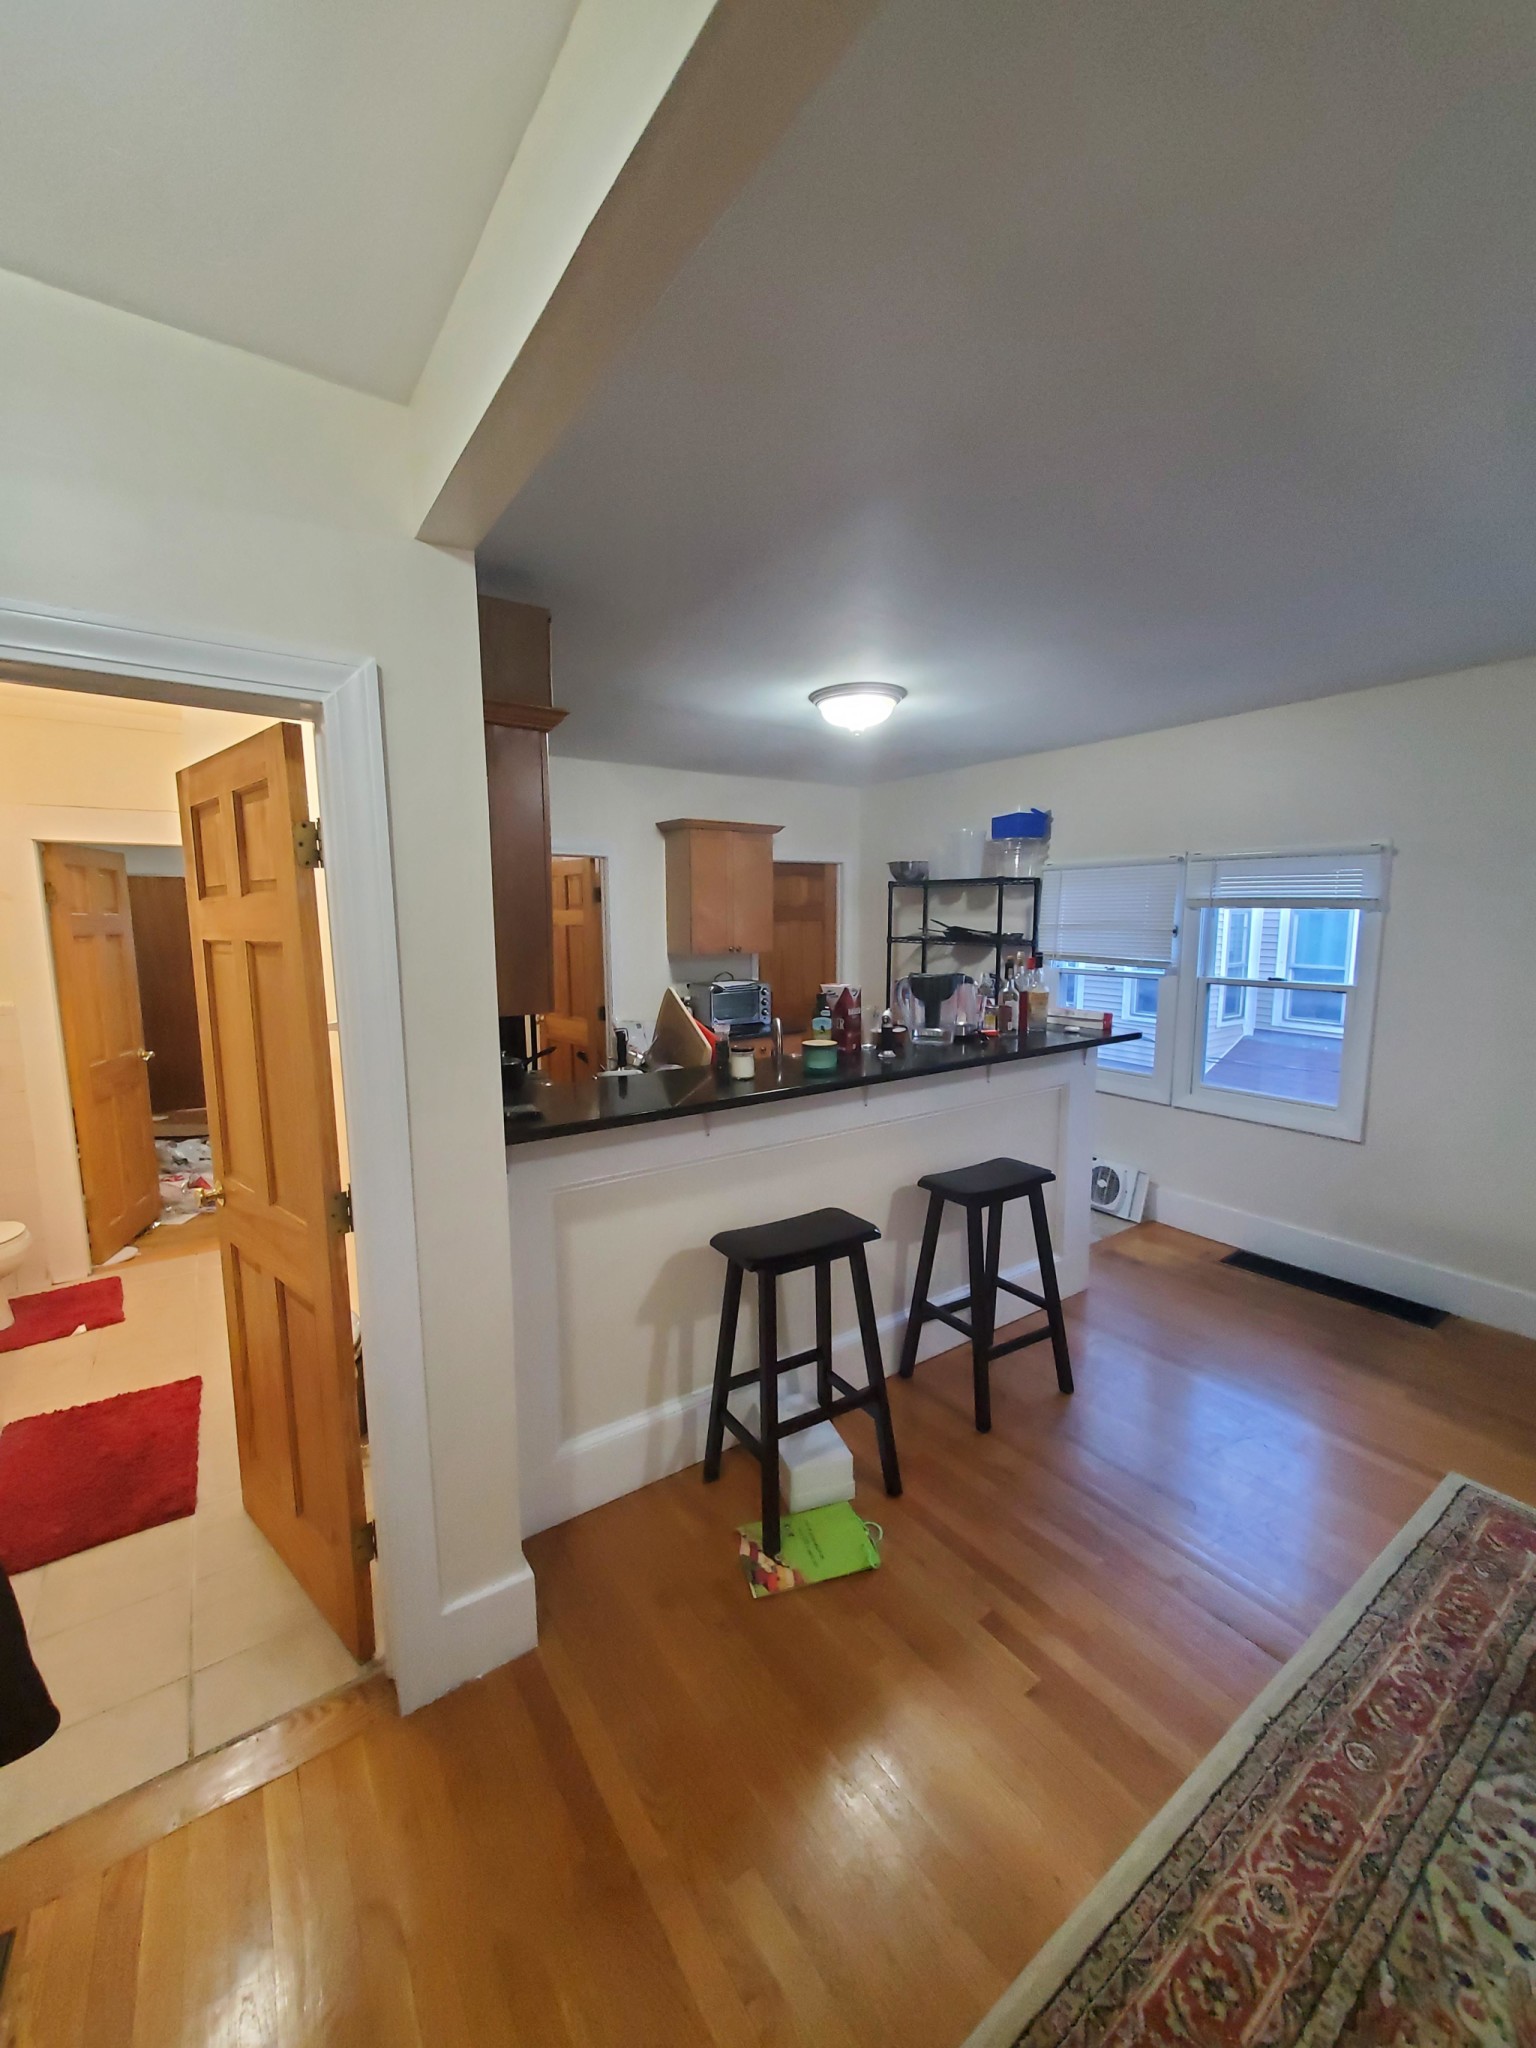 Photos of apartment on Prospect St.,Somerville MA 02143